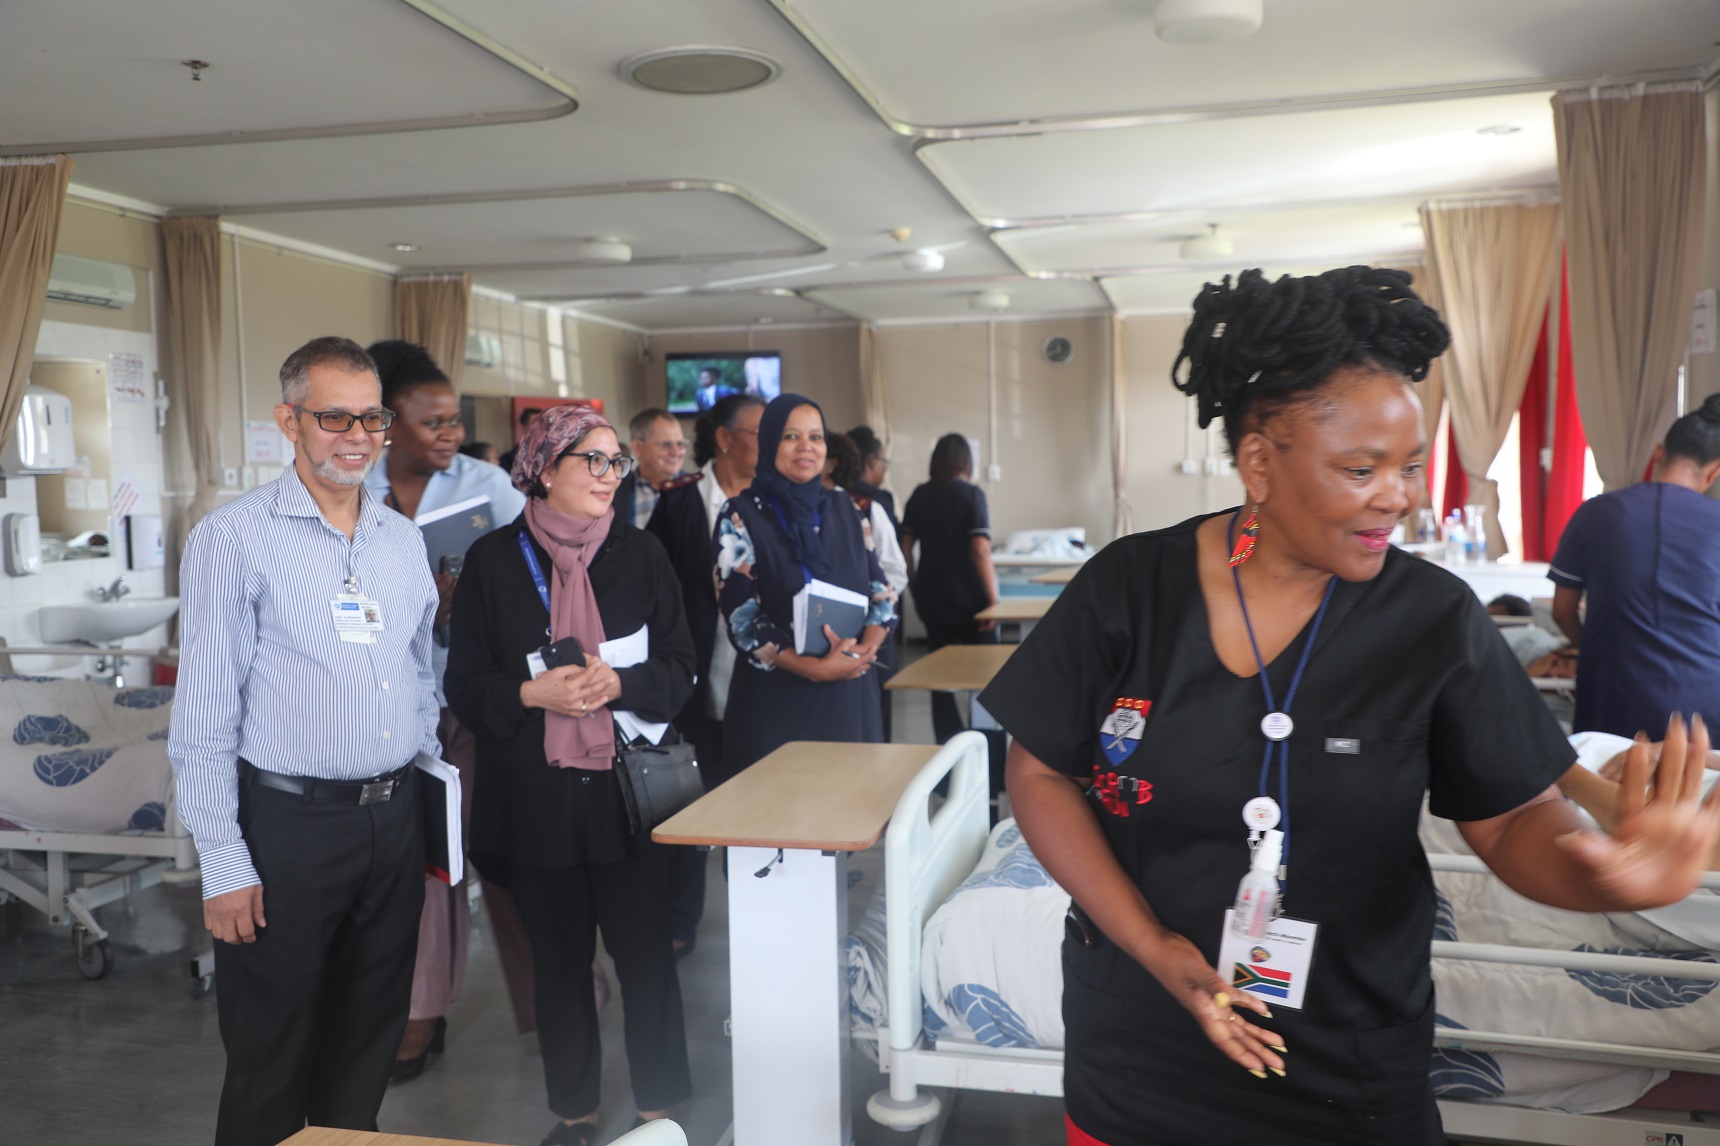 Minister Mbombo engaging patients in Ward 94 at Mitchells Plain Transitional Care Facility. At the time of the event, a total of 140 patients were admitted at the facility.